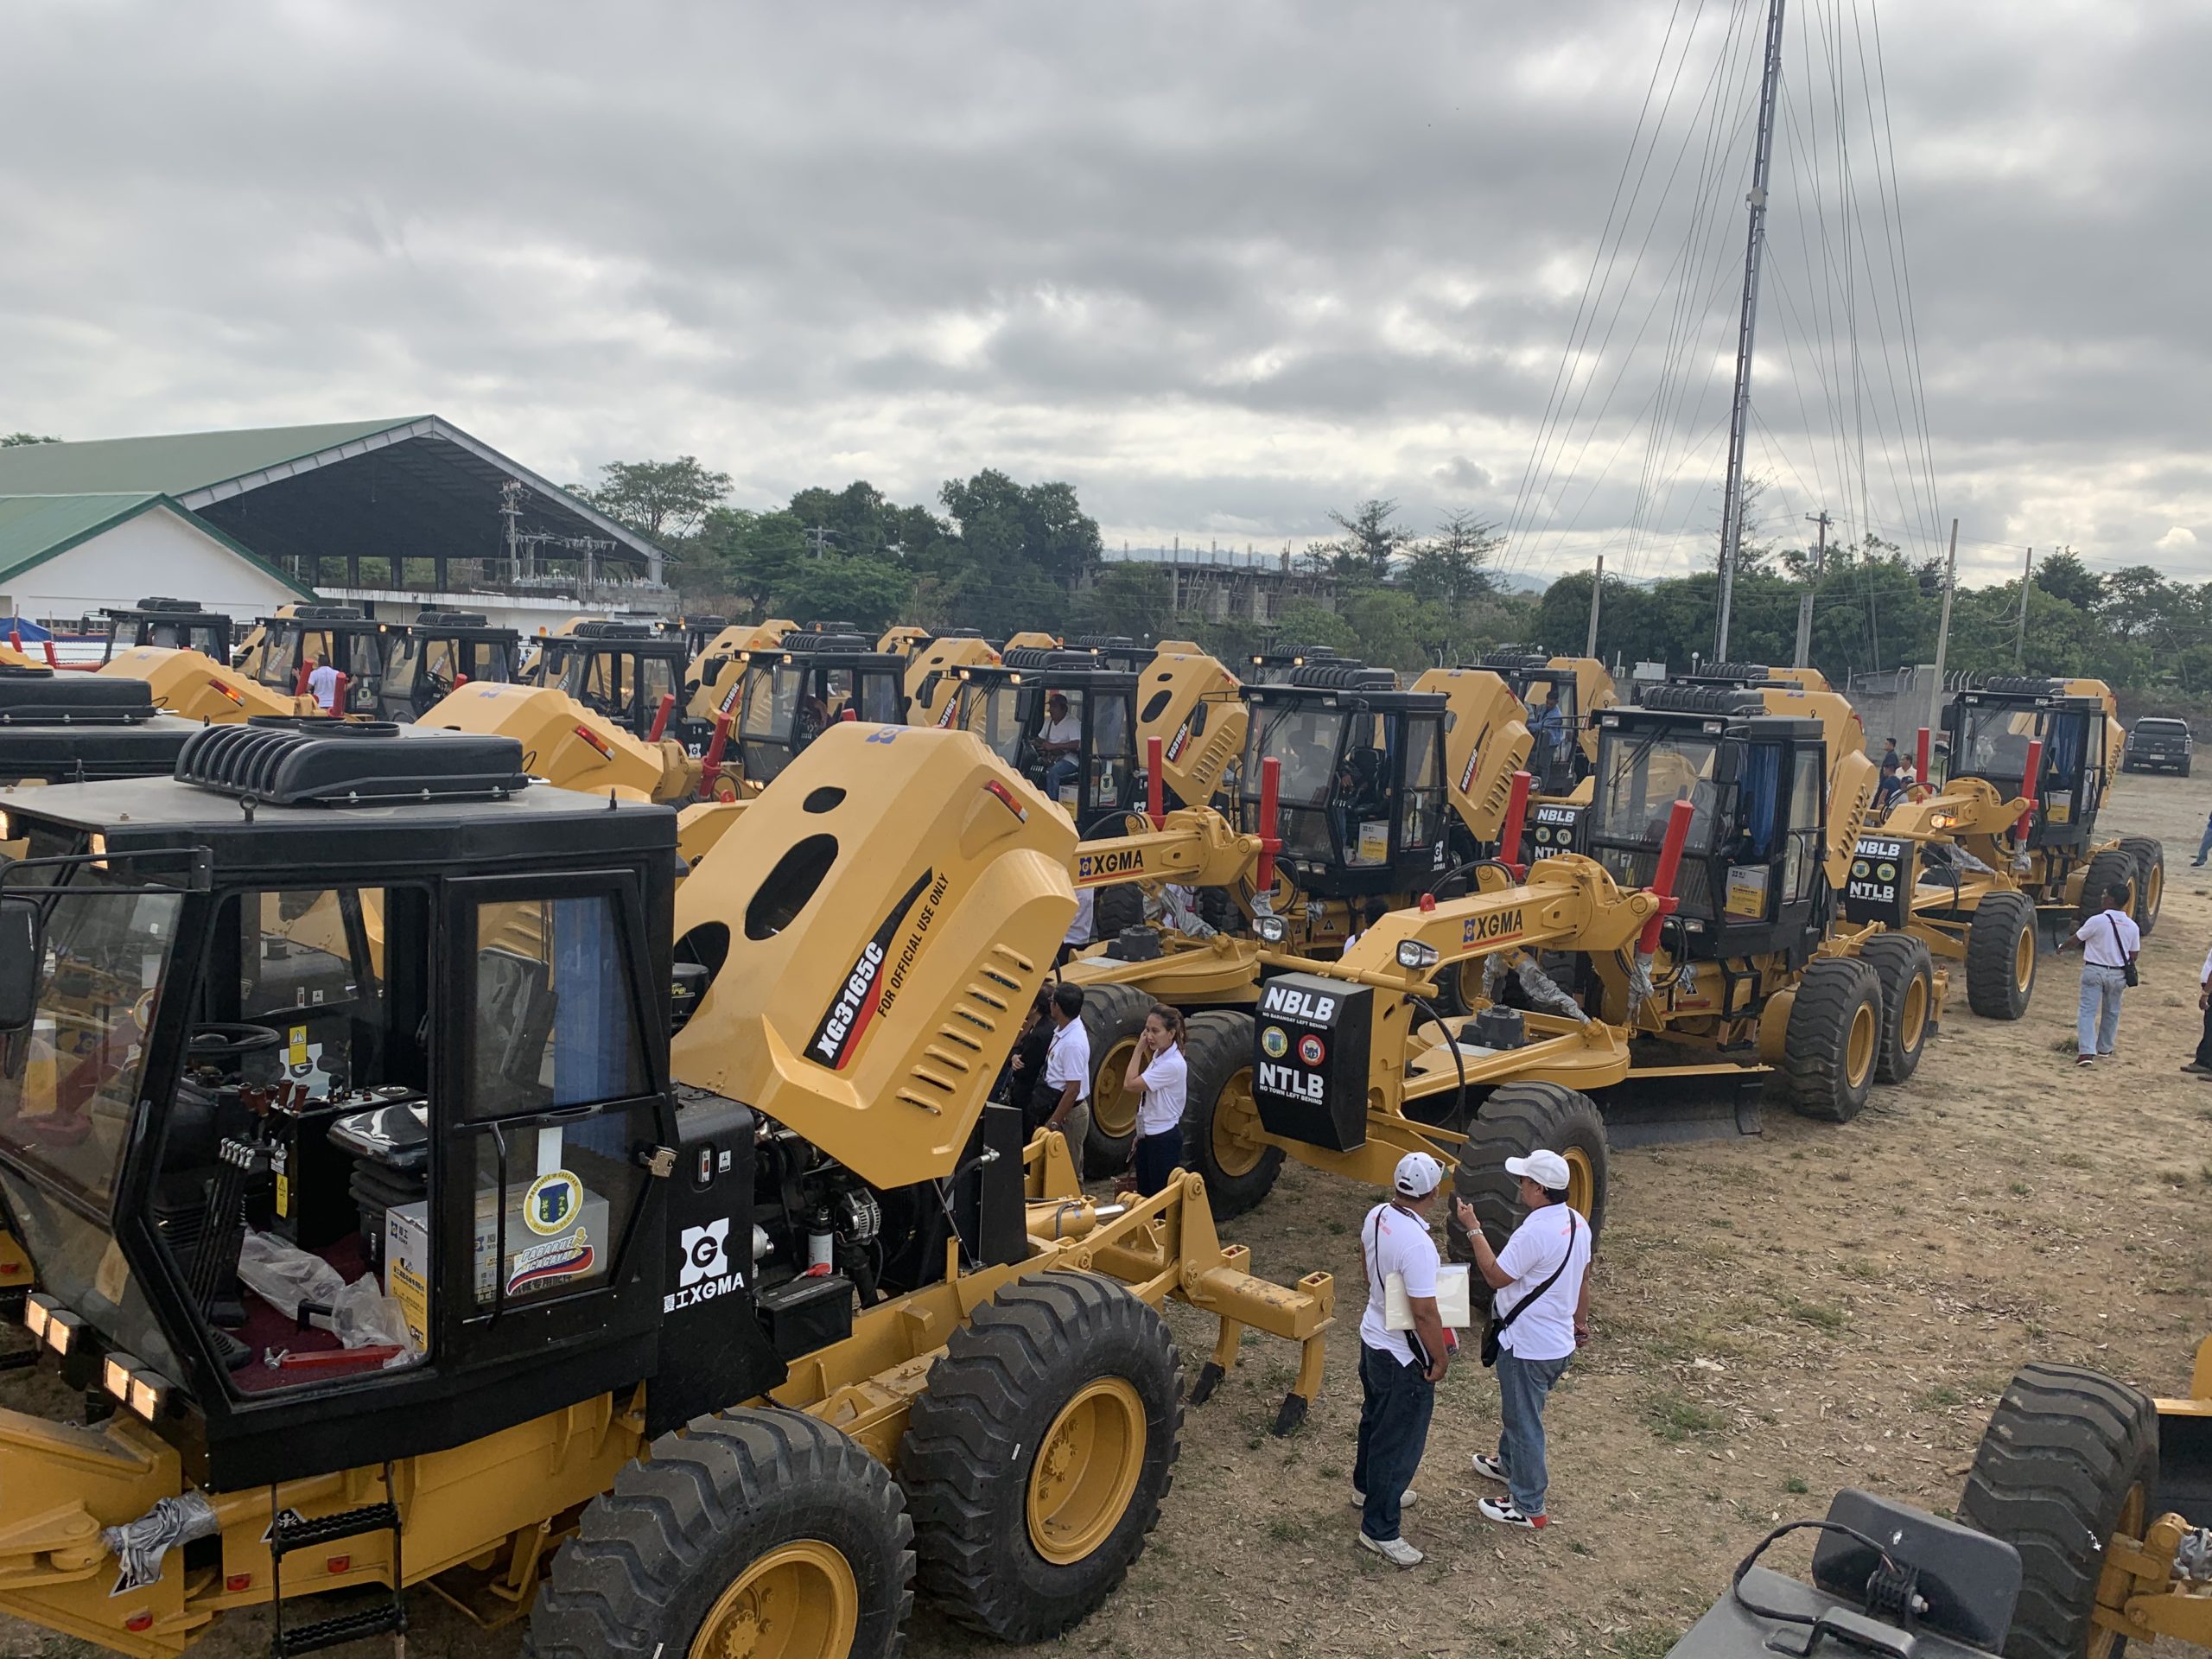 These heavy equipment units are for use of local governments in Cagayan province to complete infrastructure projects as a counterinsurgency measure. VILLAMOR VISAYA JR.